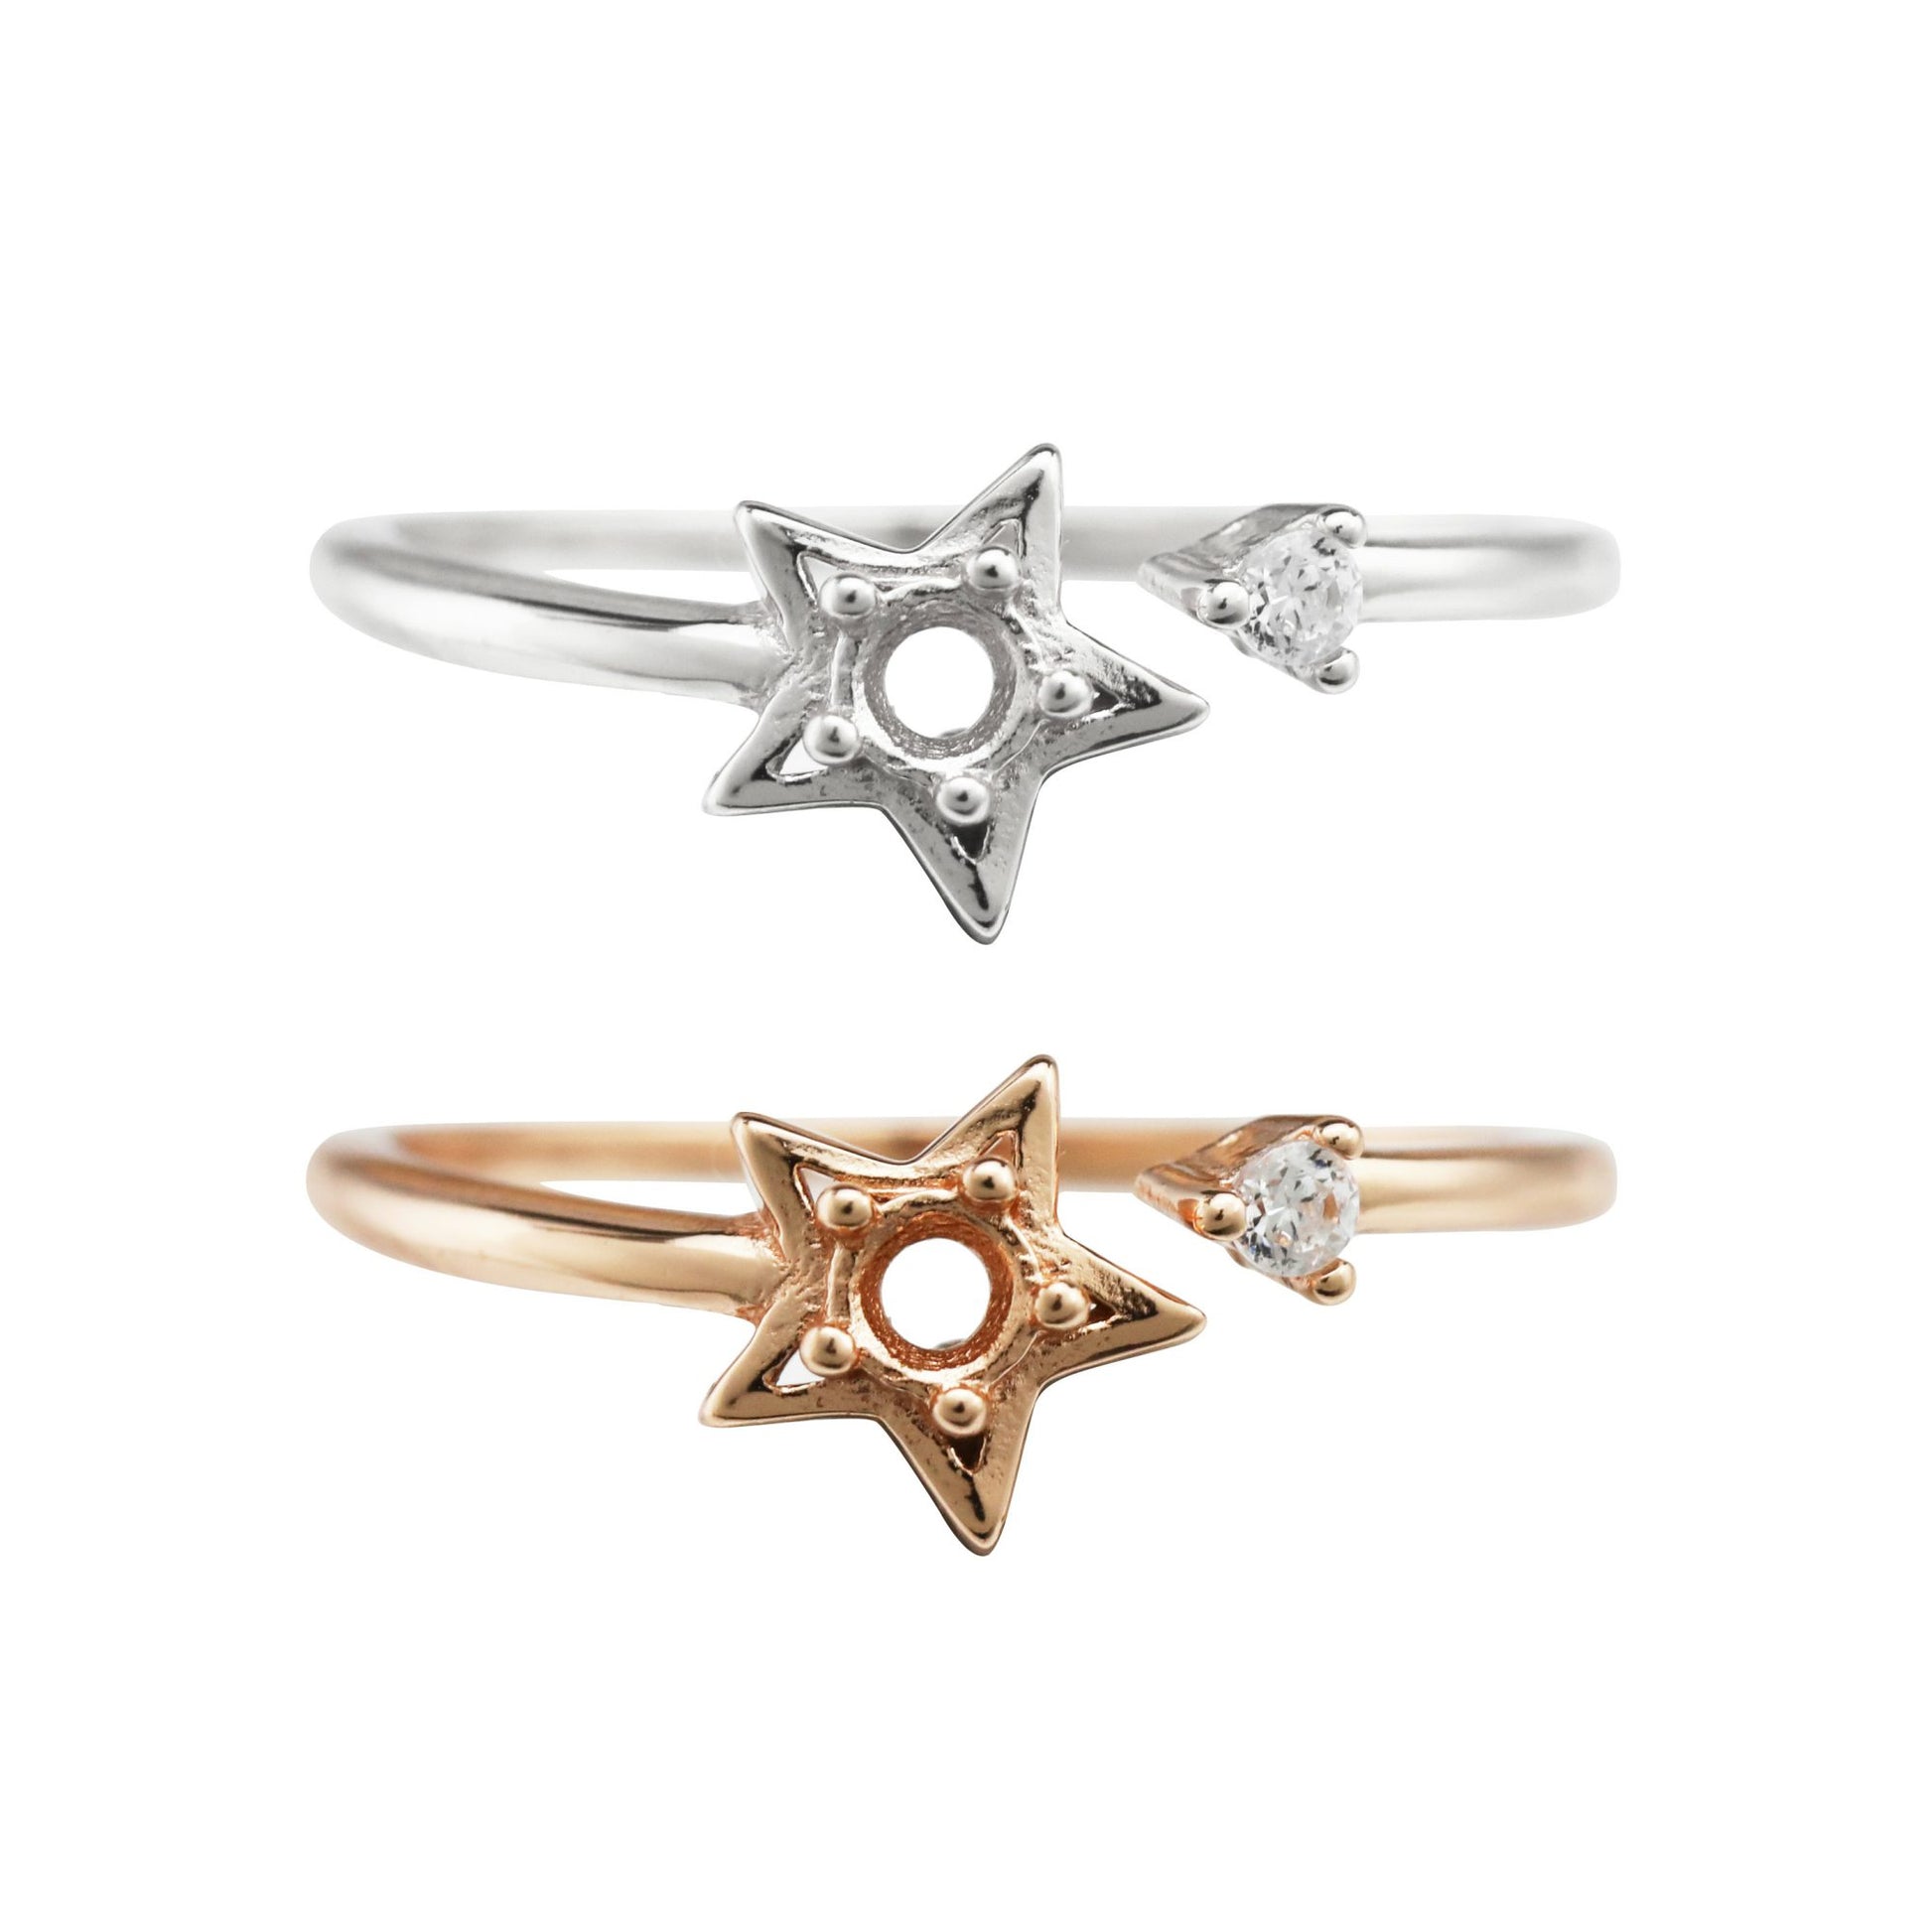 One silver and one rose gold one size fits all star and arrow semi mount for a round gem.